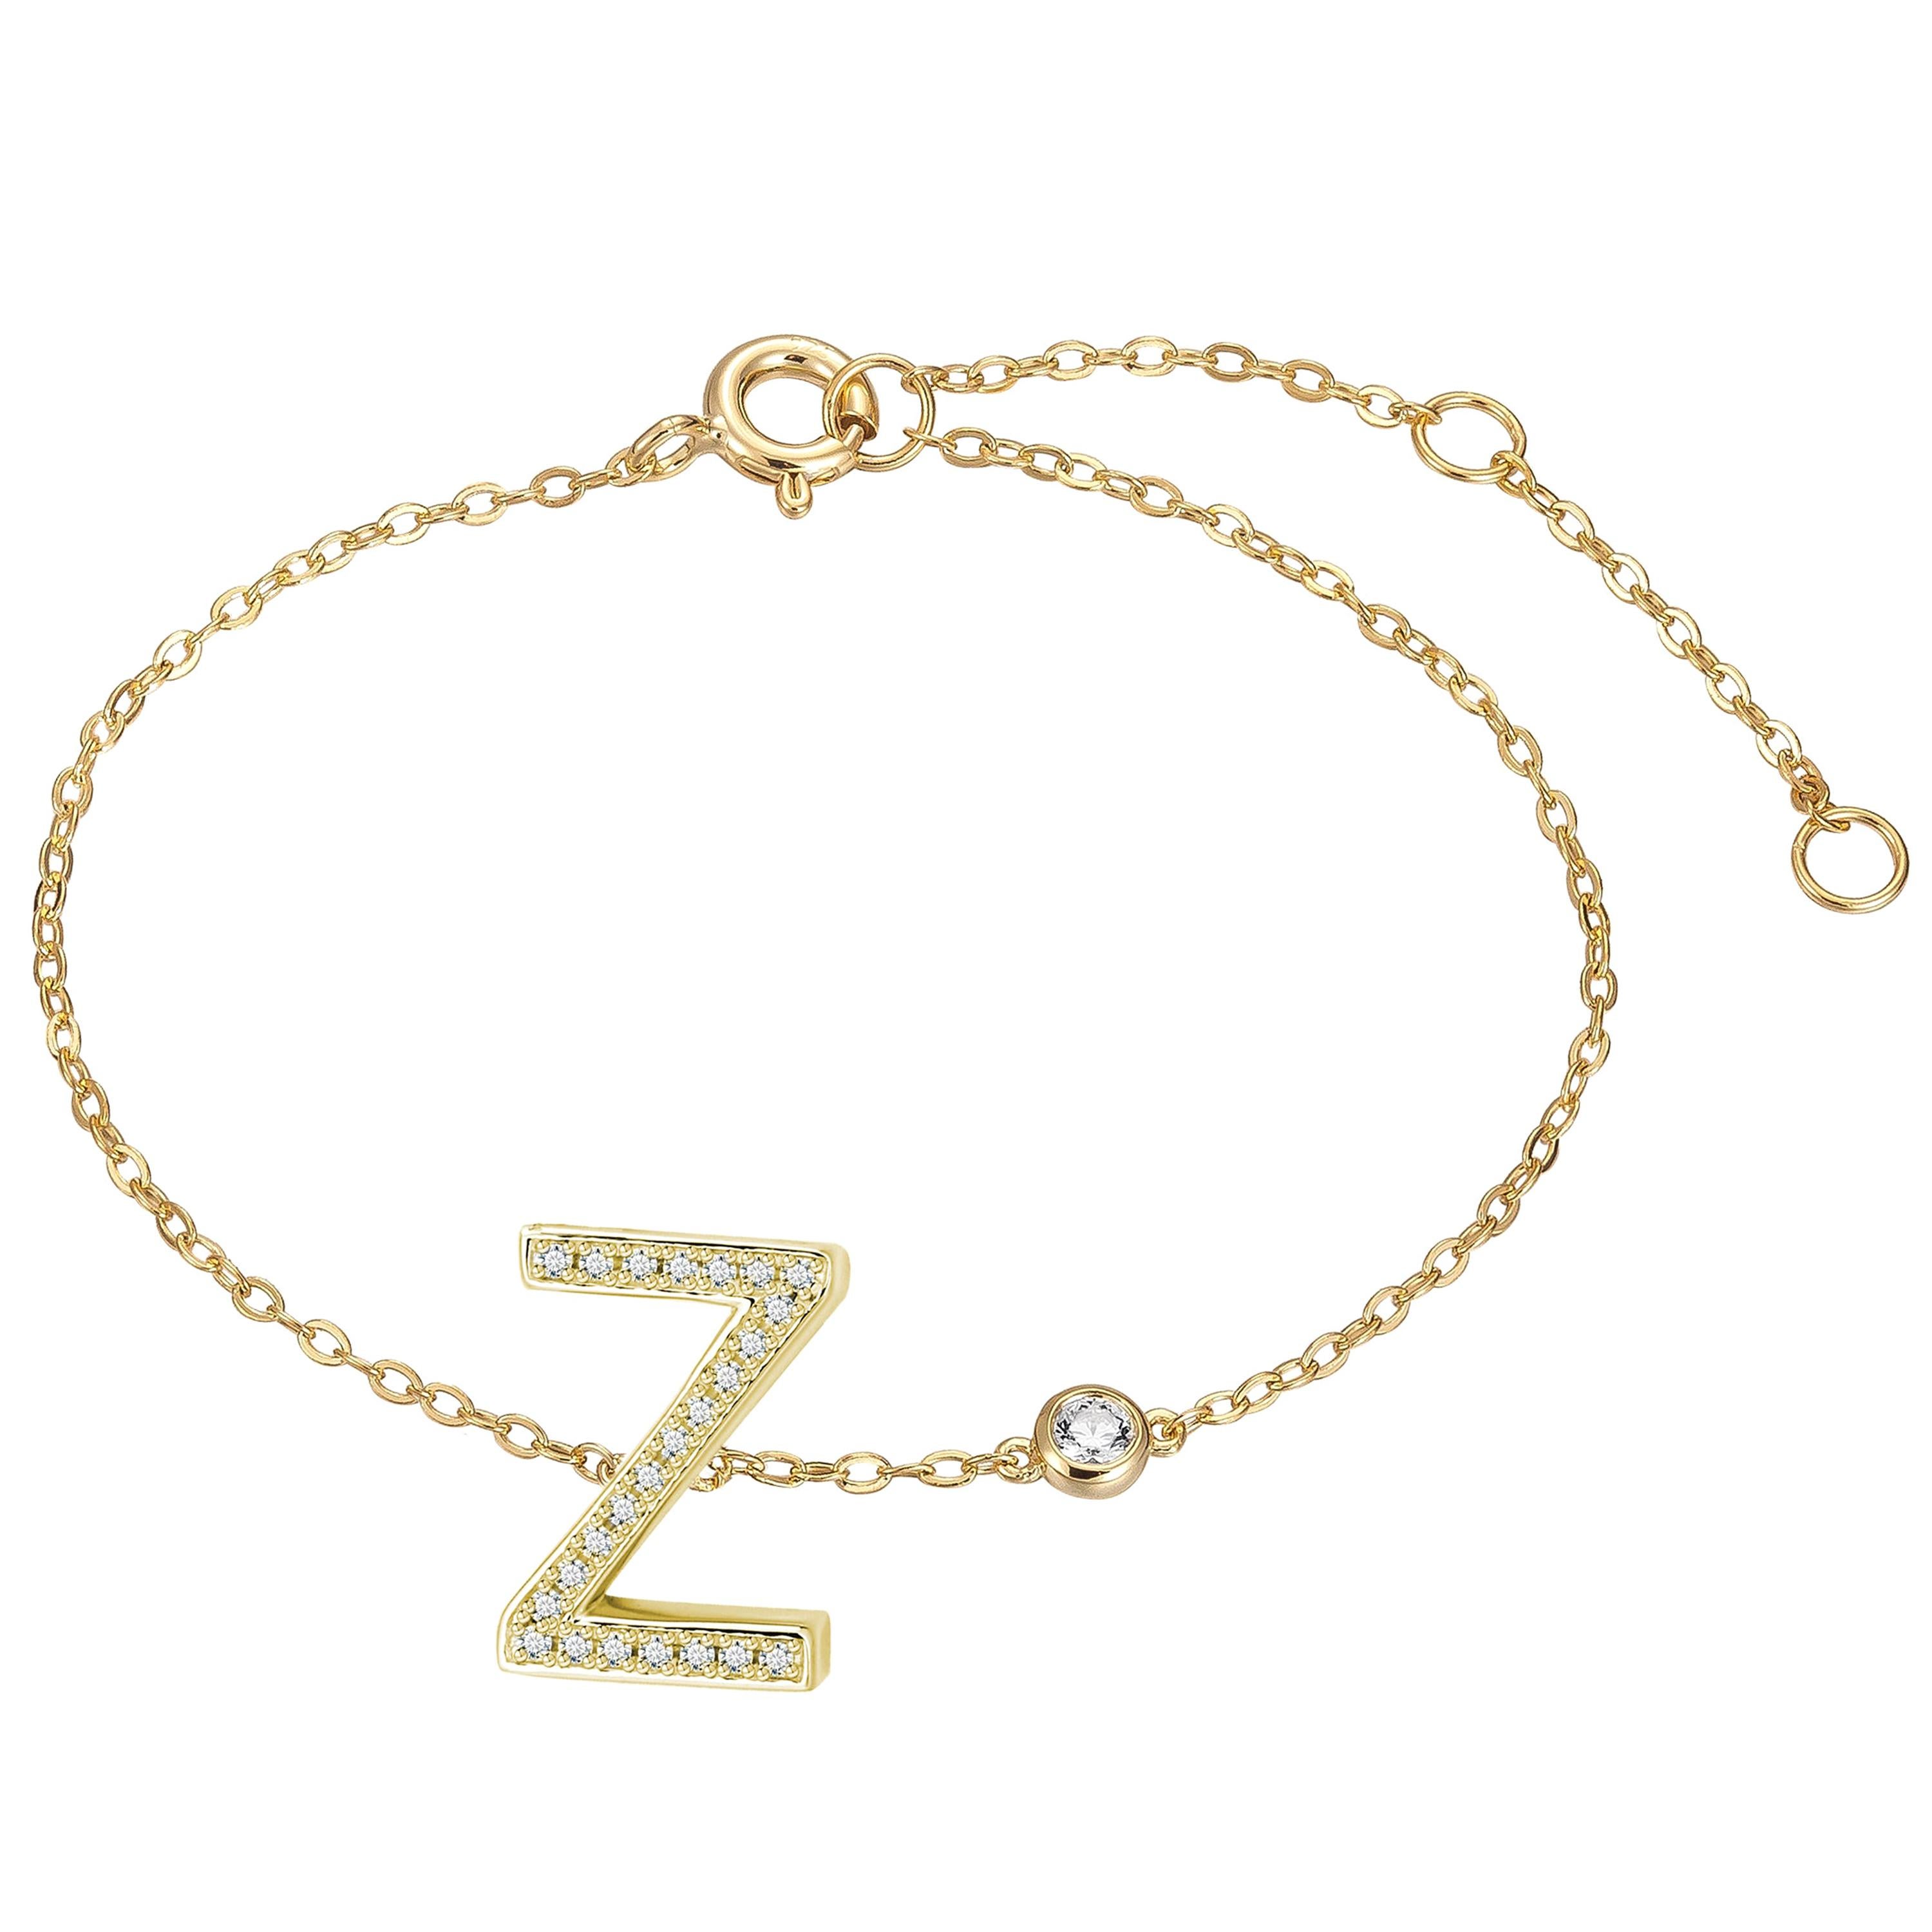 Z Initial Bezel Chain Anklet For Sale